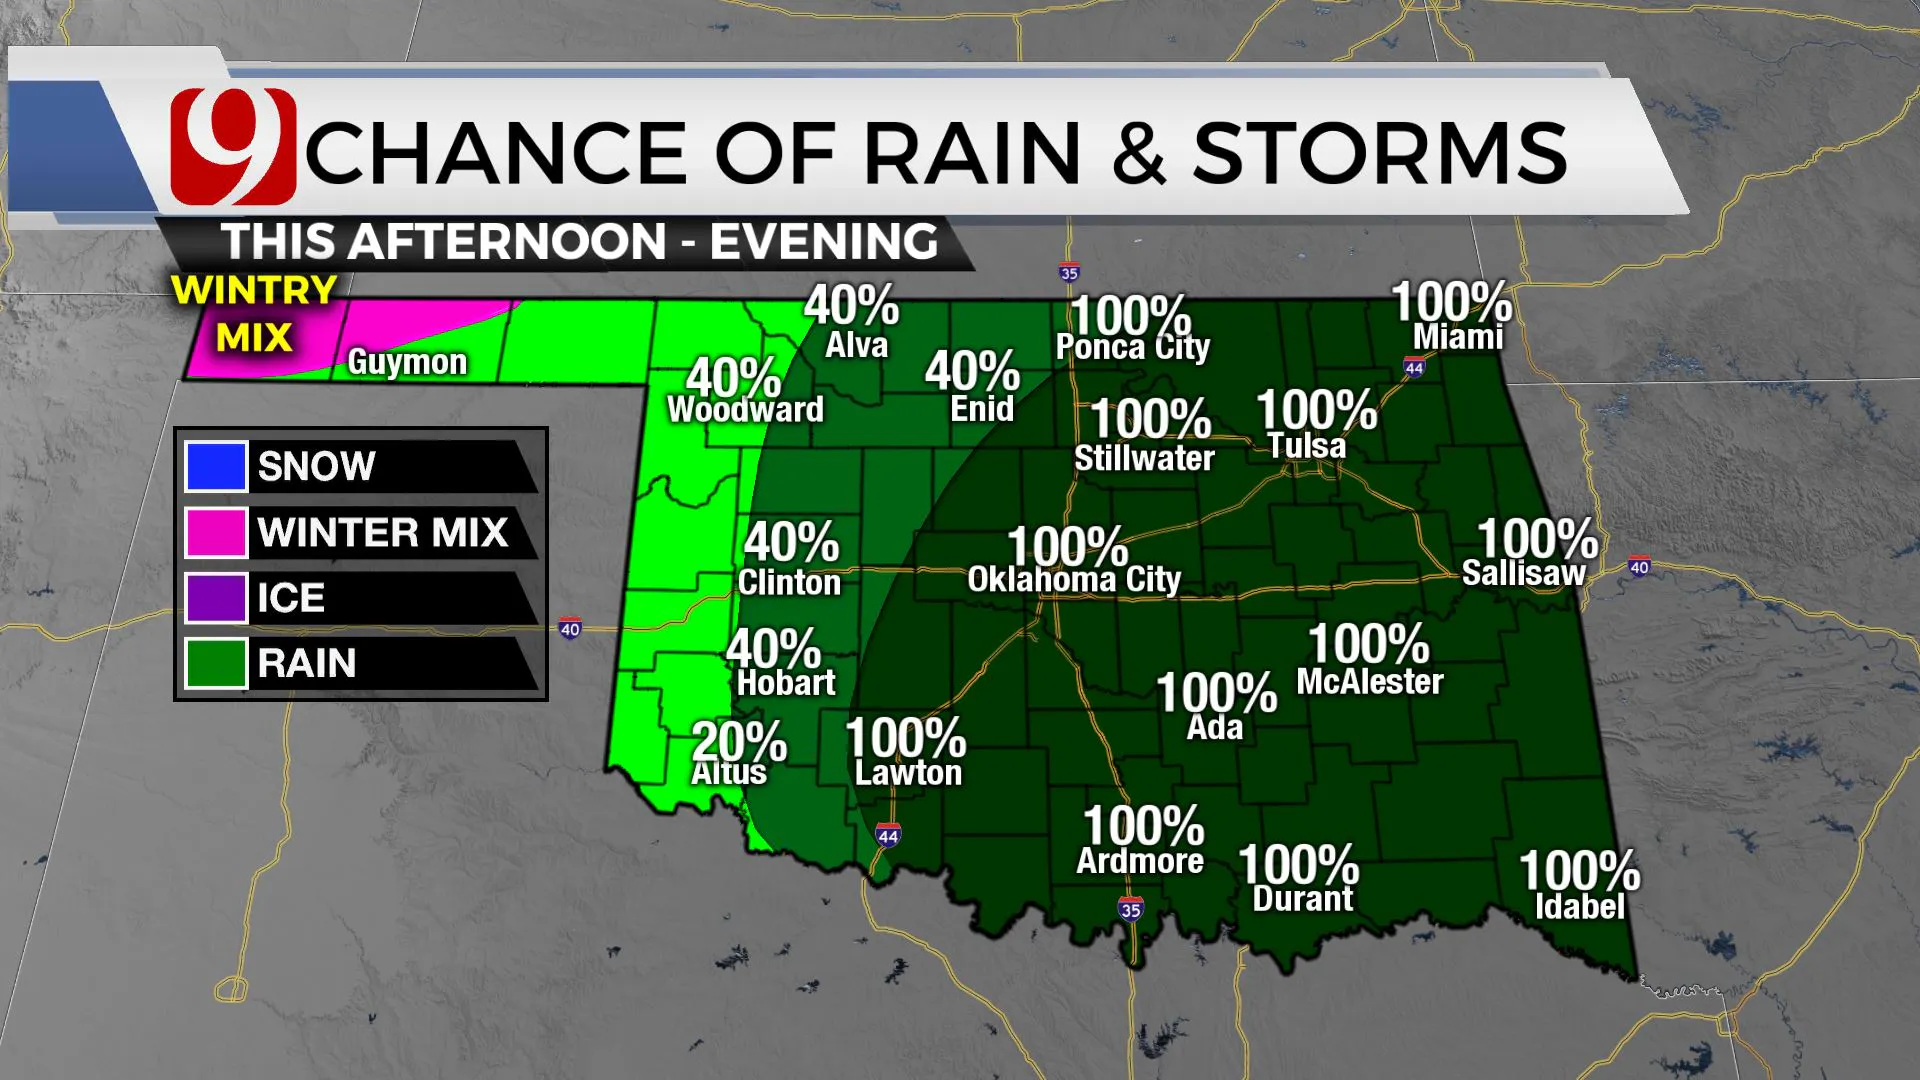 Chances of rain and storms Tuesday evening.